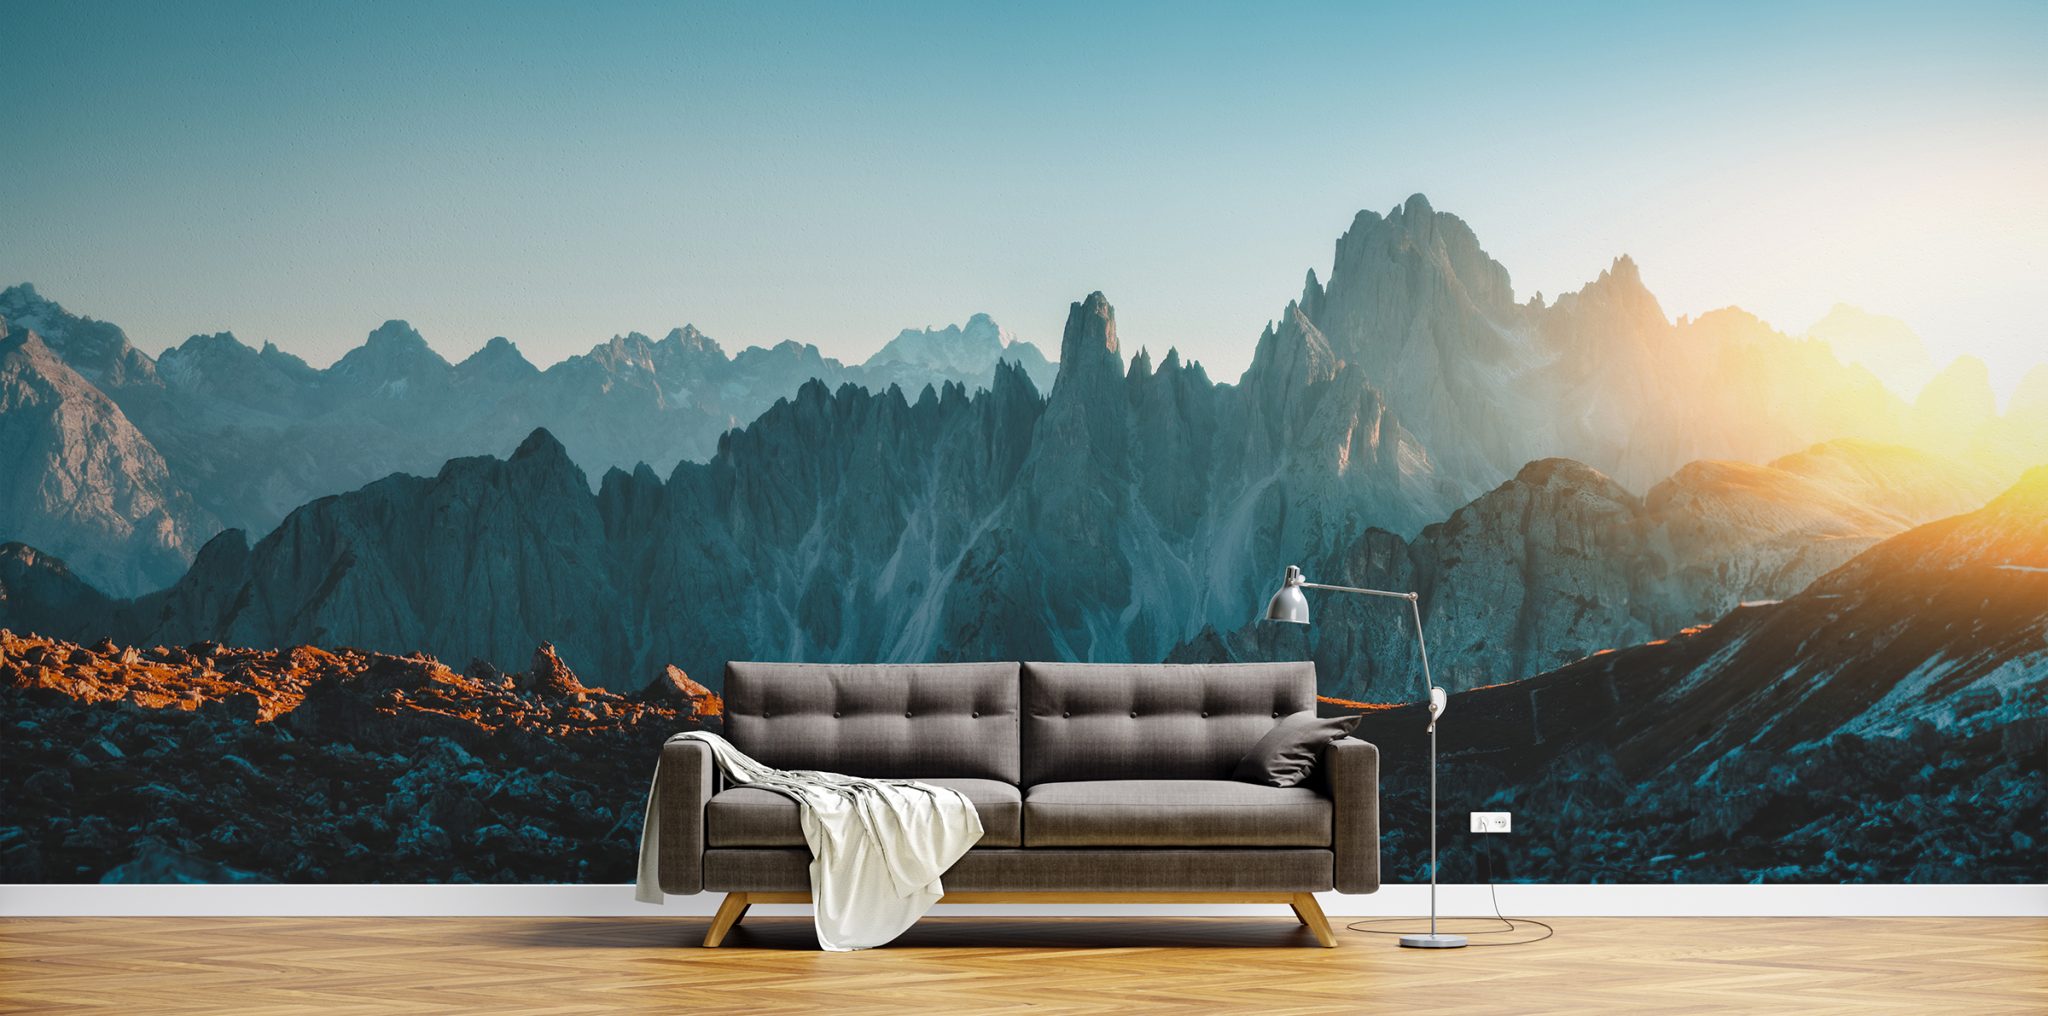 Minimalist, Yet Striking: Discover the Best Aesthetic Wallpapers